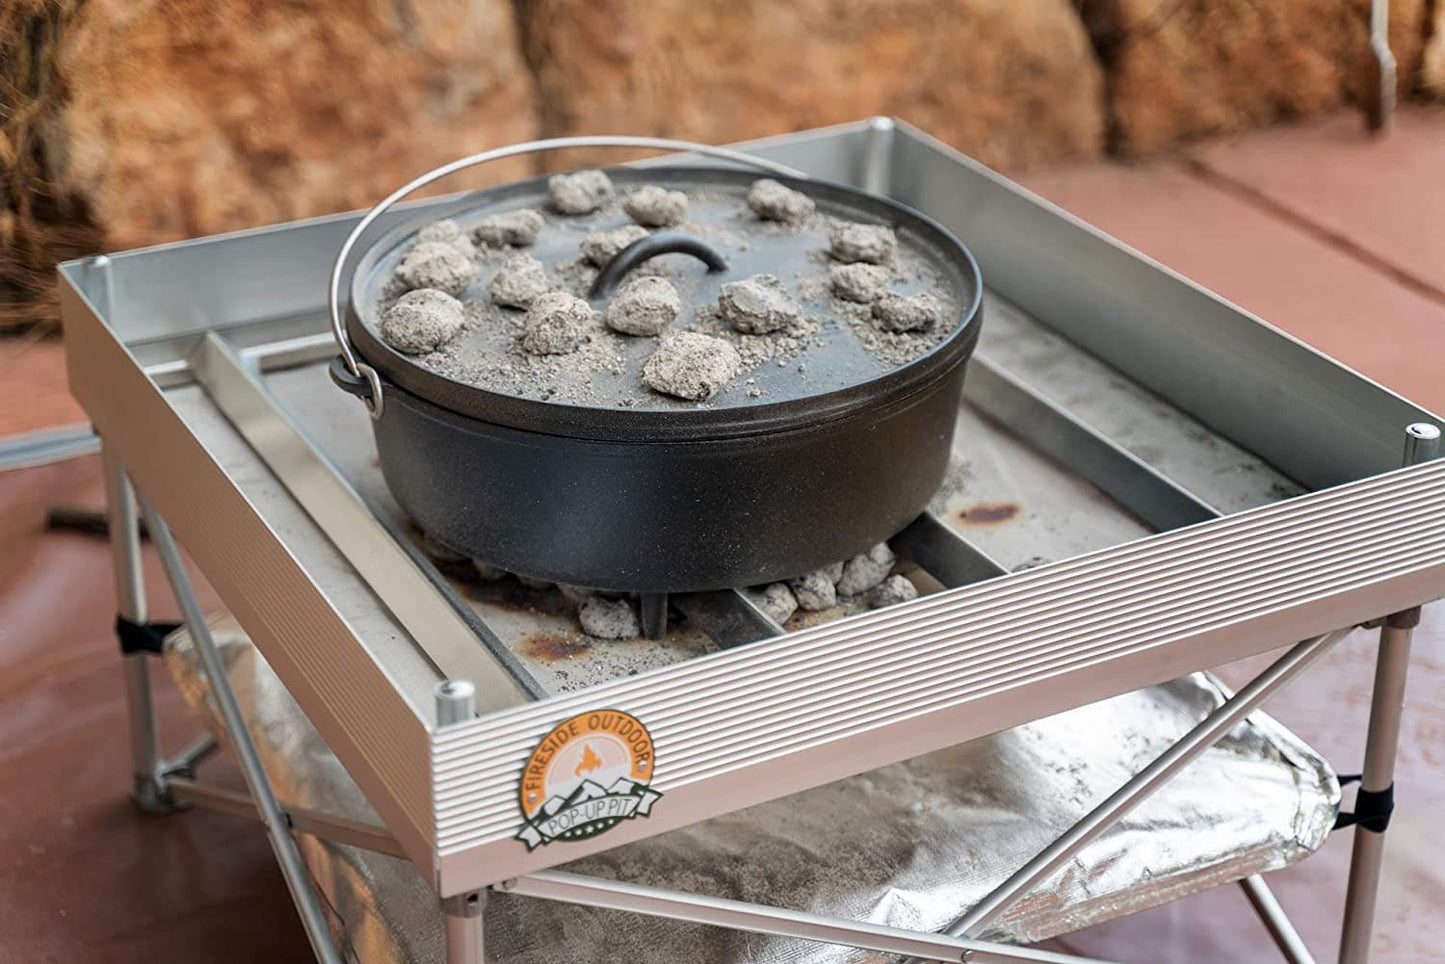 Featuring the Pop-Up Fire Pit Frontier Grate dutch oven, fire pan accessory manufactured by Fireside shown here from a fourth angle.